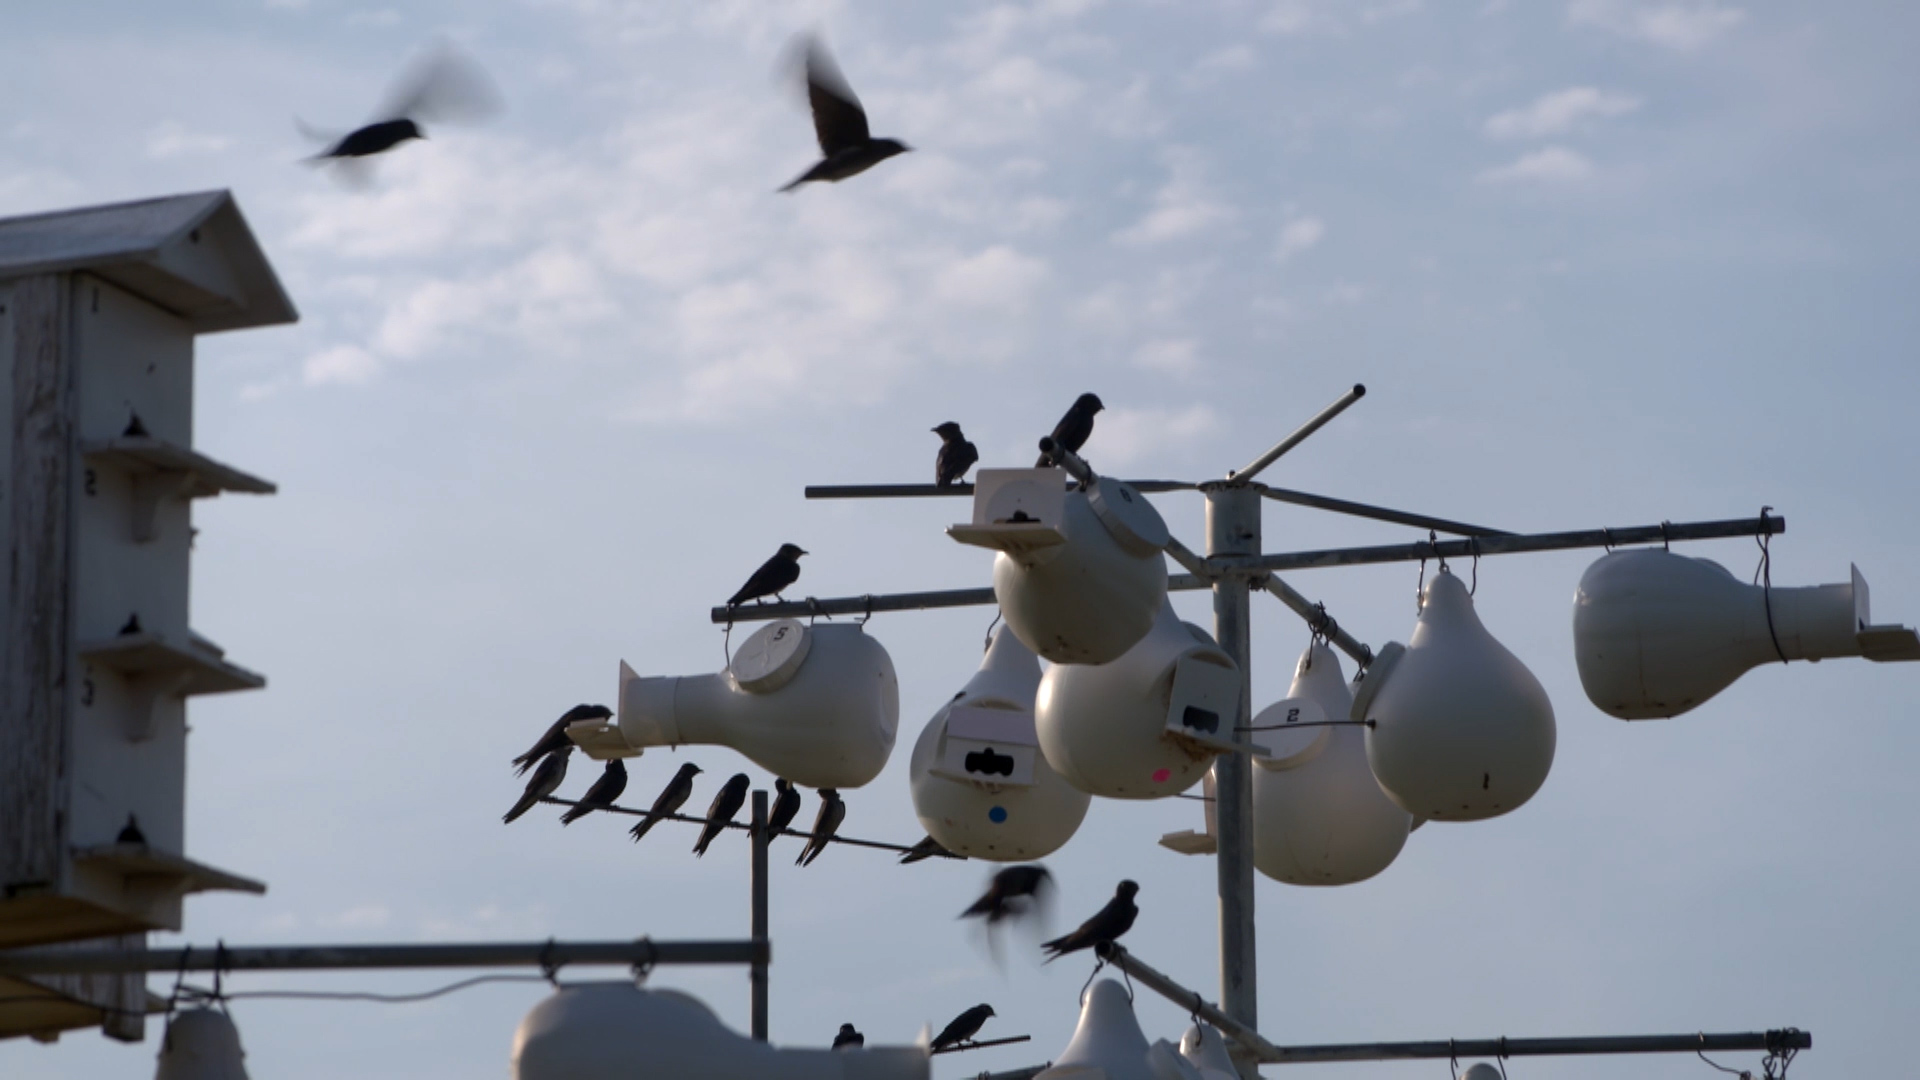 The purple martin is one migratory bird species Pantex biologist Jim Ray researches.